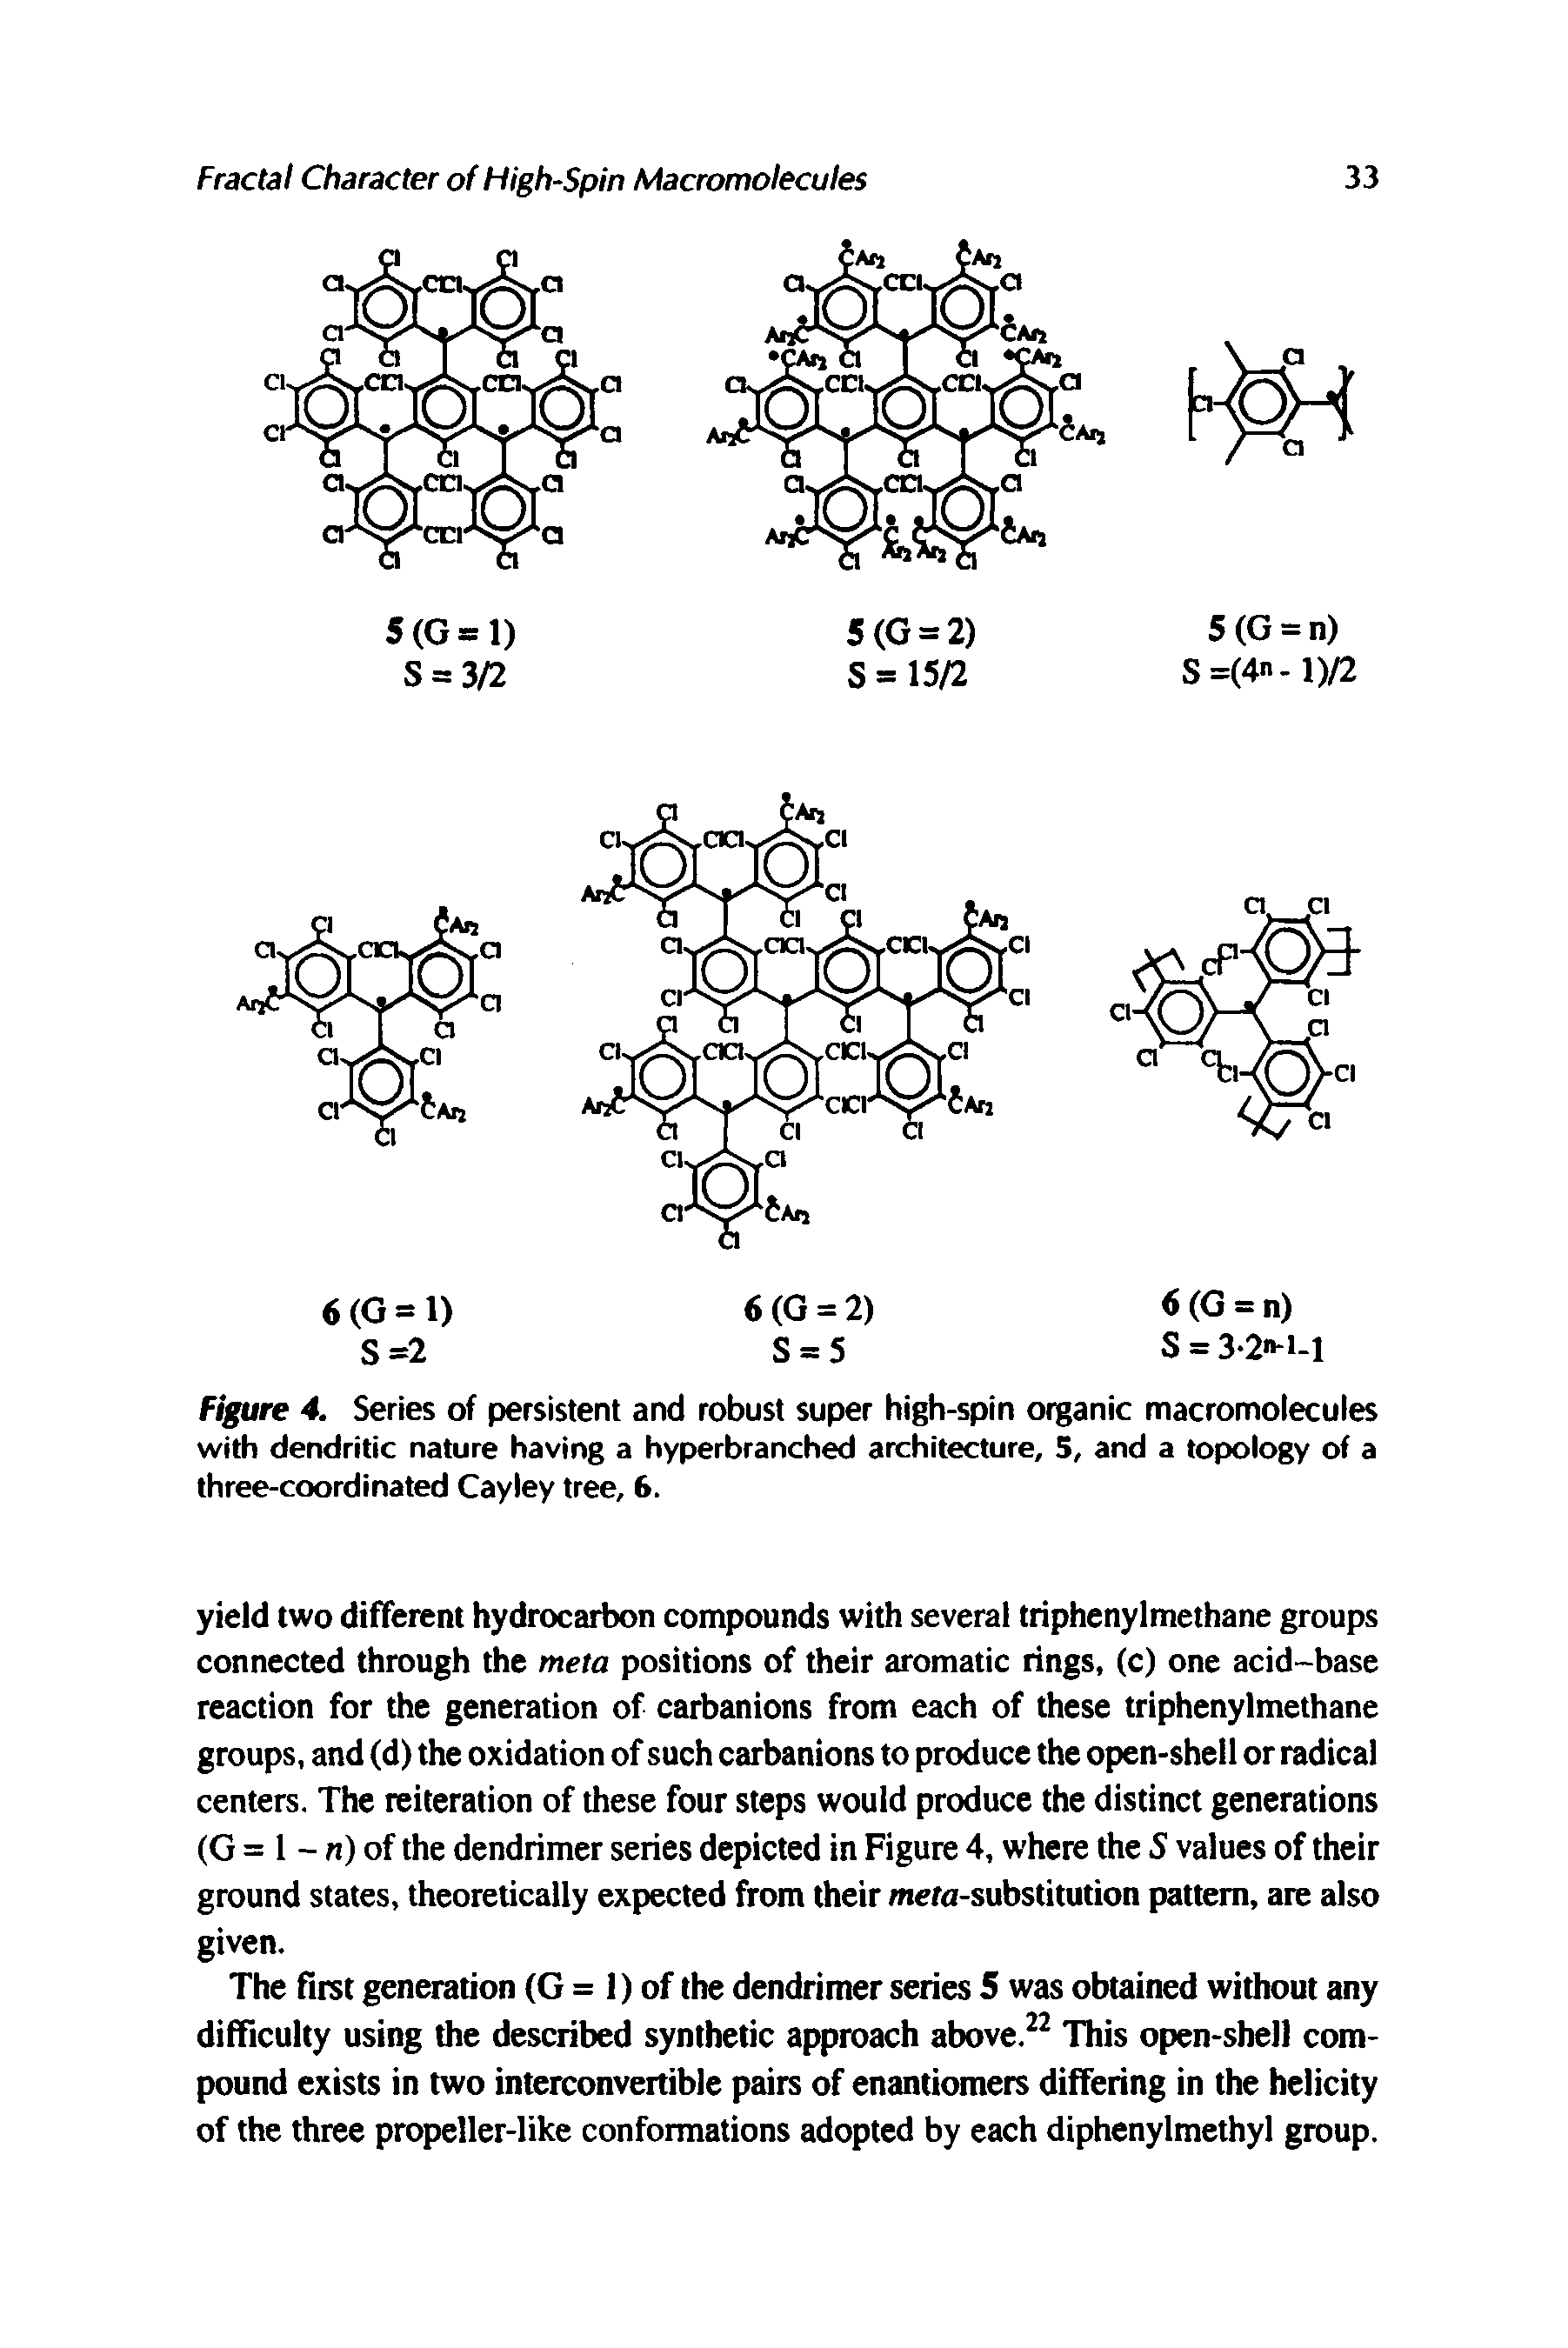 Figure 4. Series of persistent and robust super high-spin organic macromolecules with dendritic nature having a hyperbranched architecture, 5, and a topology of a three-coordinated Cayley tree, 6.